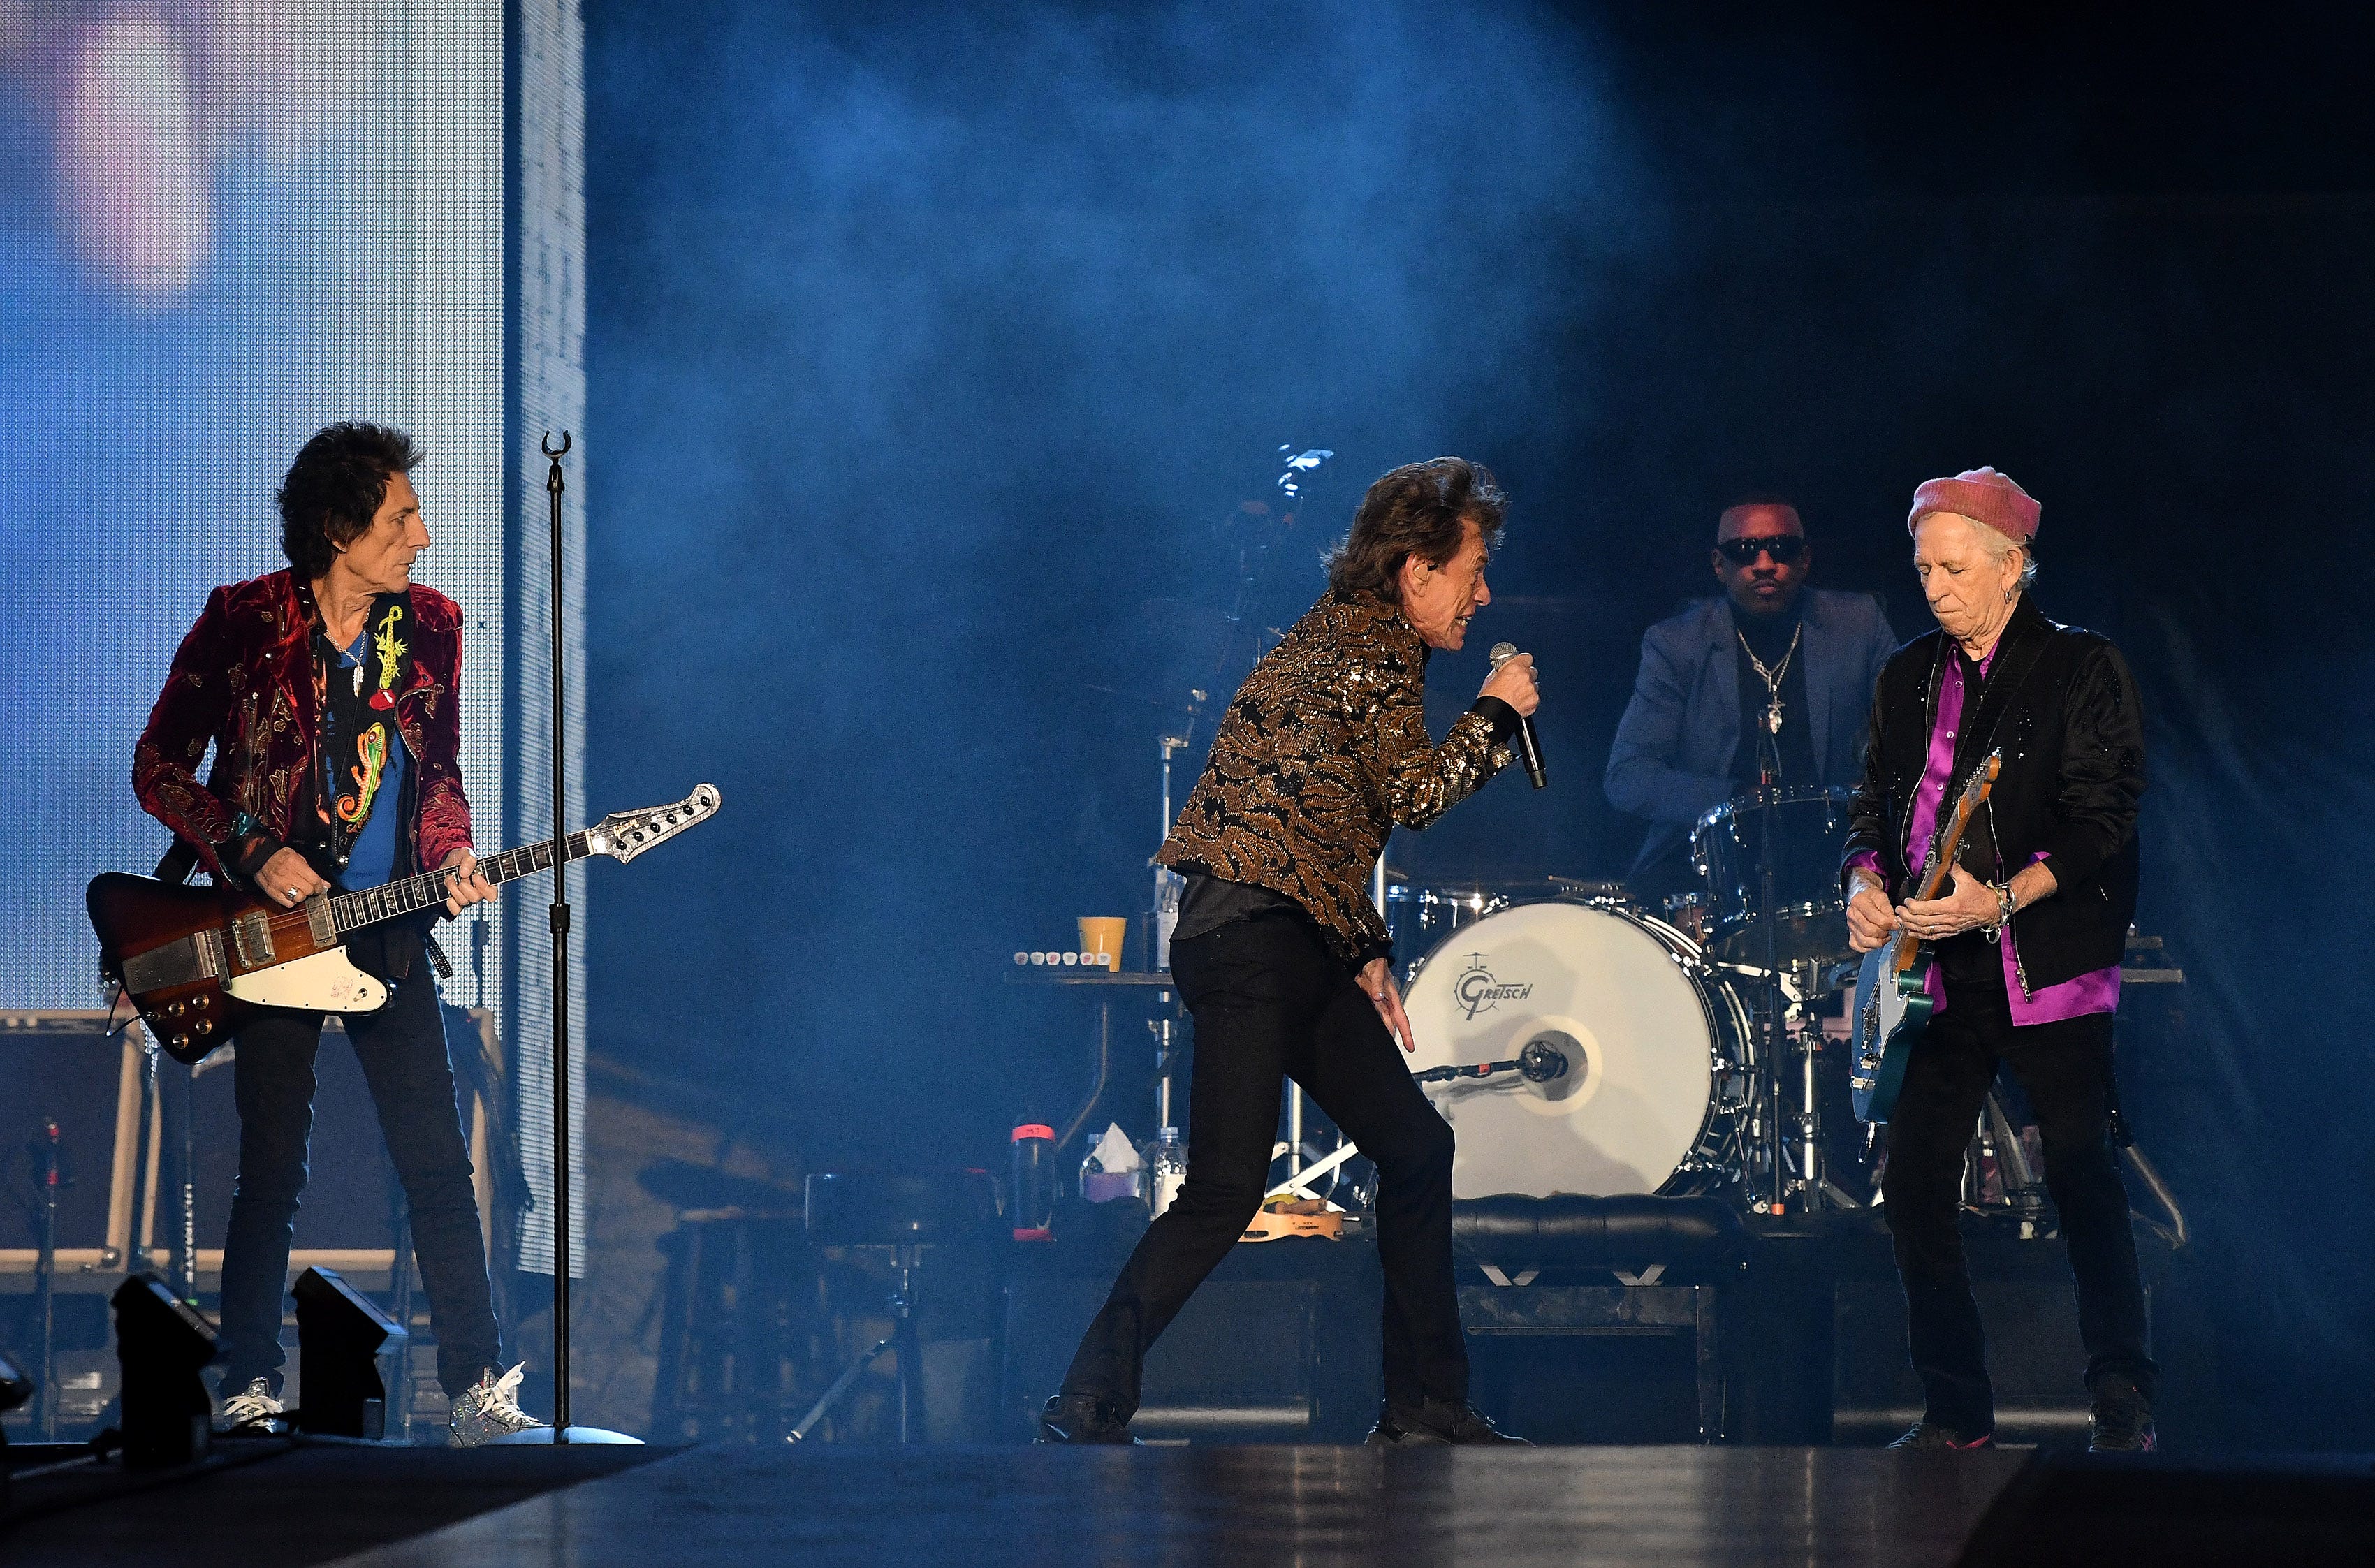 The Rolling Stones Ronnie Wood, left, Mick Jagger, Keith Richards and new drummer Steve Jordan, rear, take the stage at Ford Field.